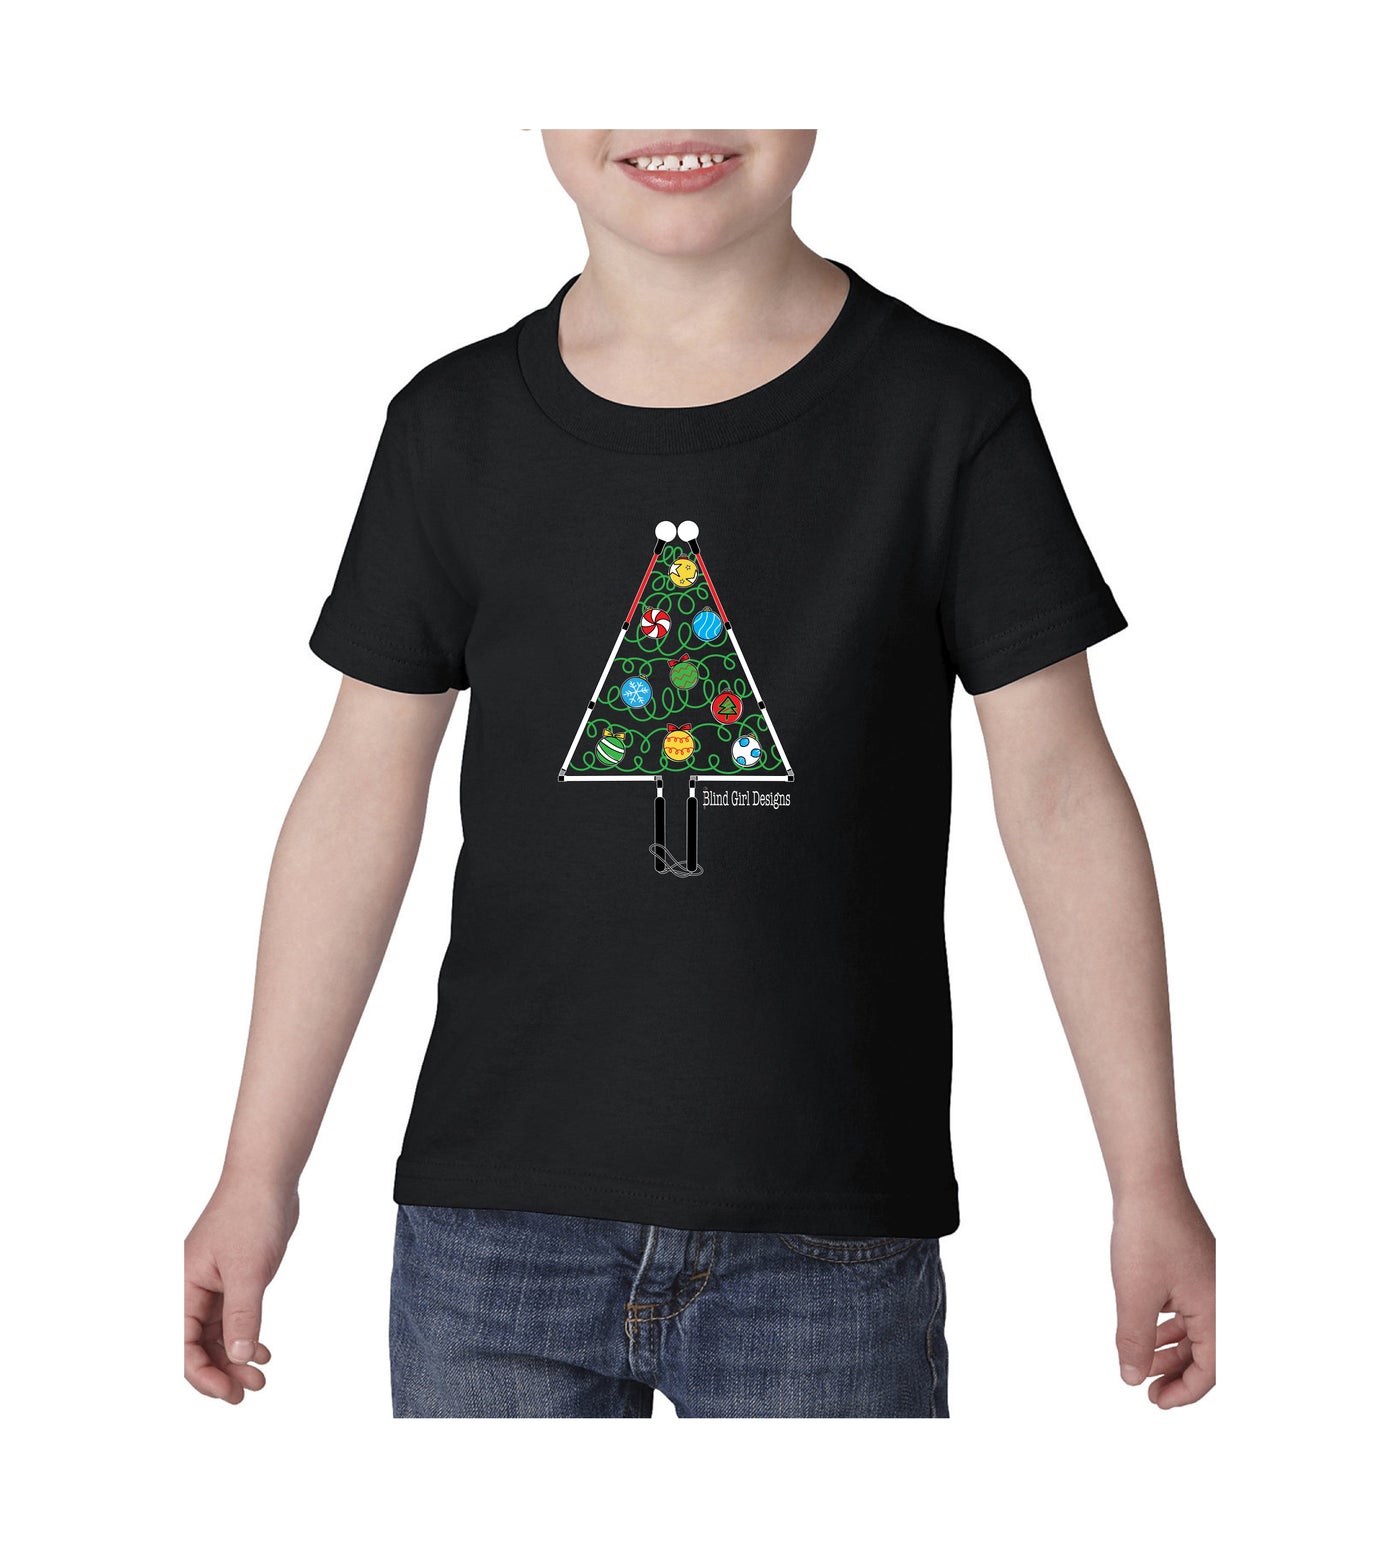 Kids and Toddlers Christmas Tree White Cane T-Shirt - Black